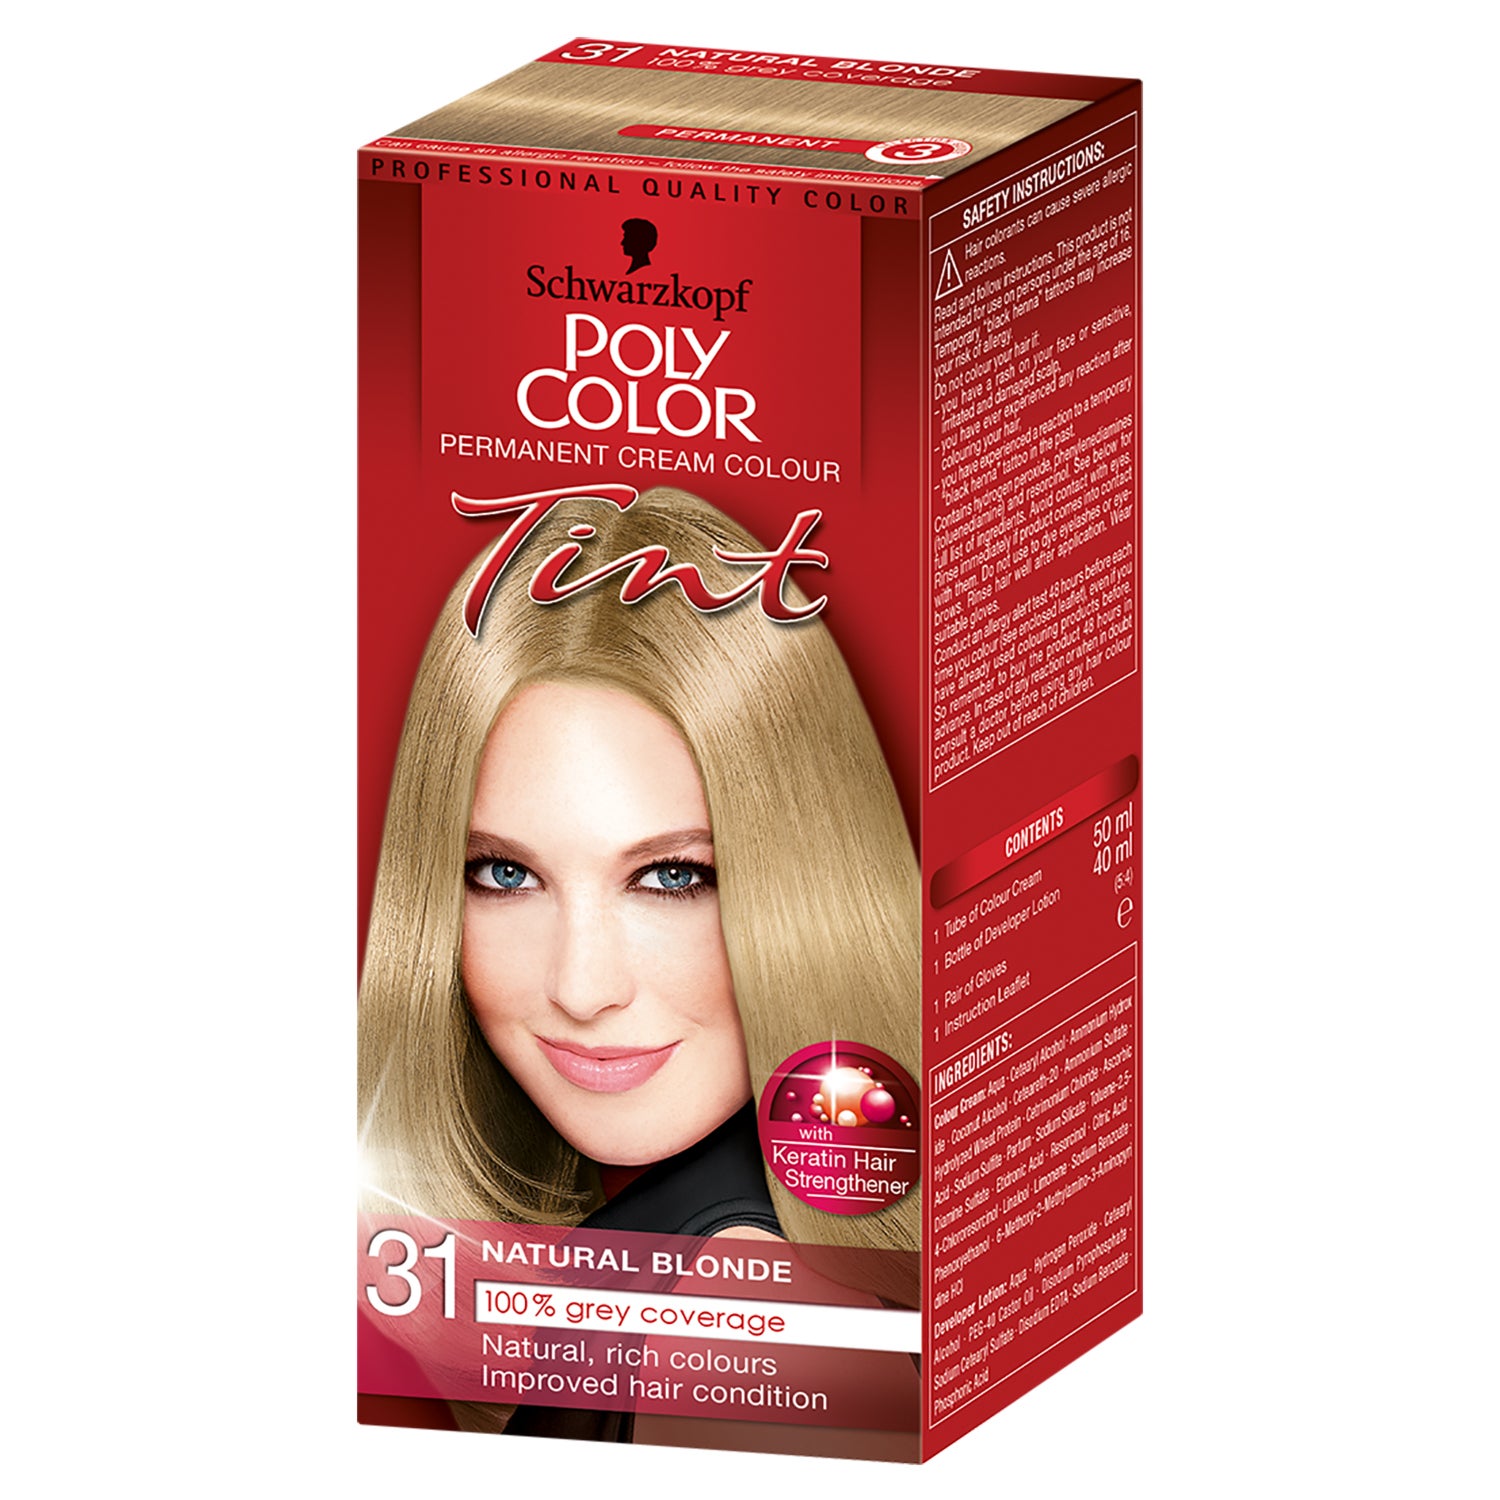 Natural rich natural blonde colours, with improved hair condition, that wil...